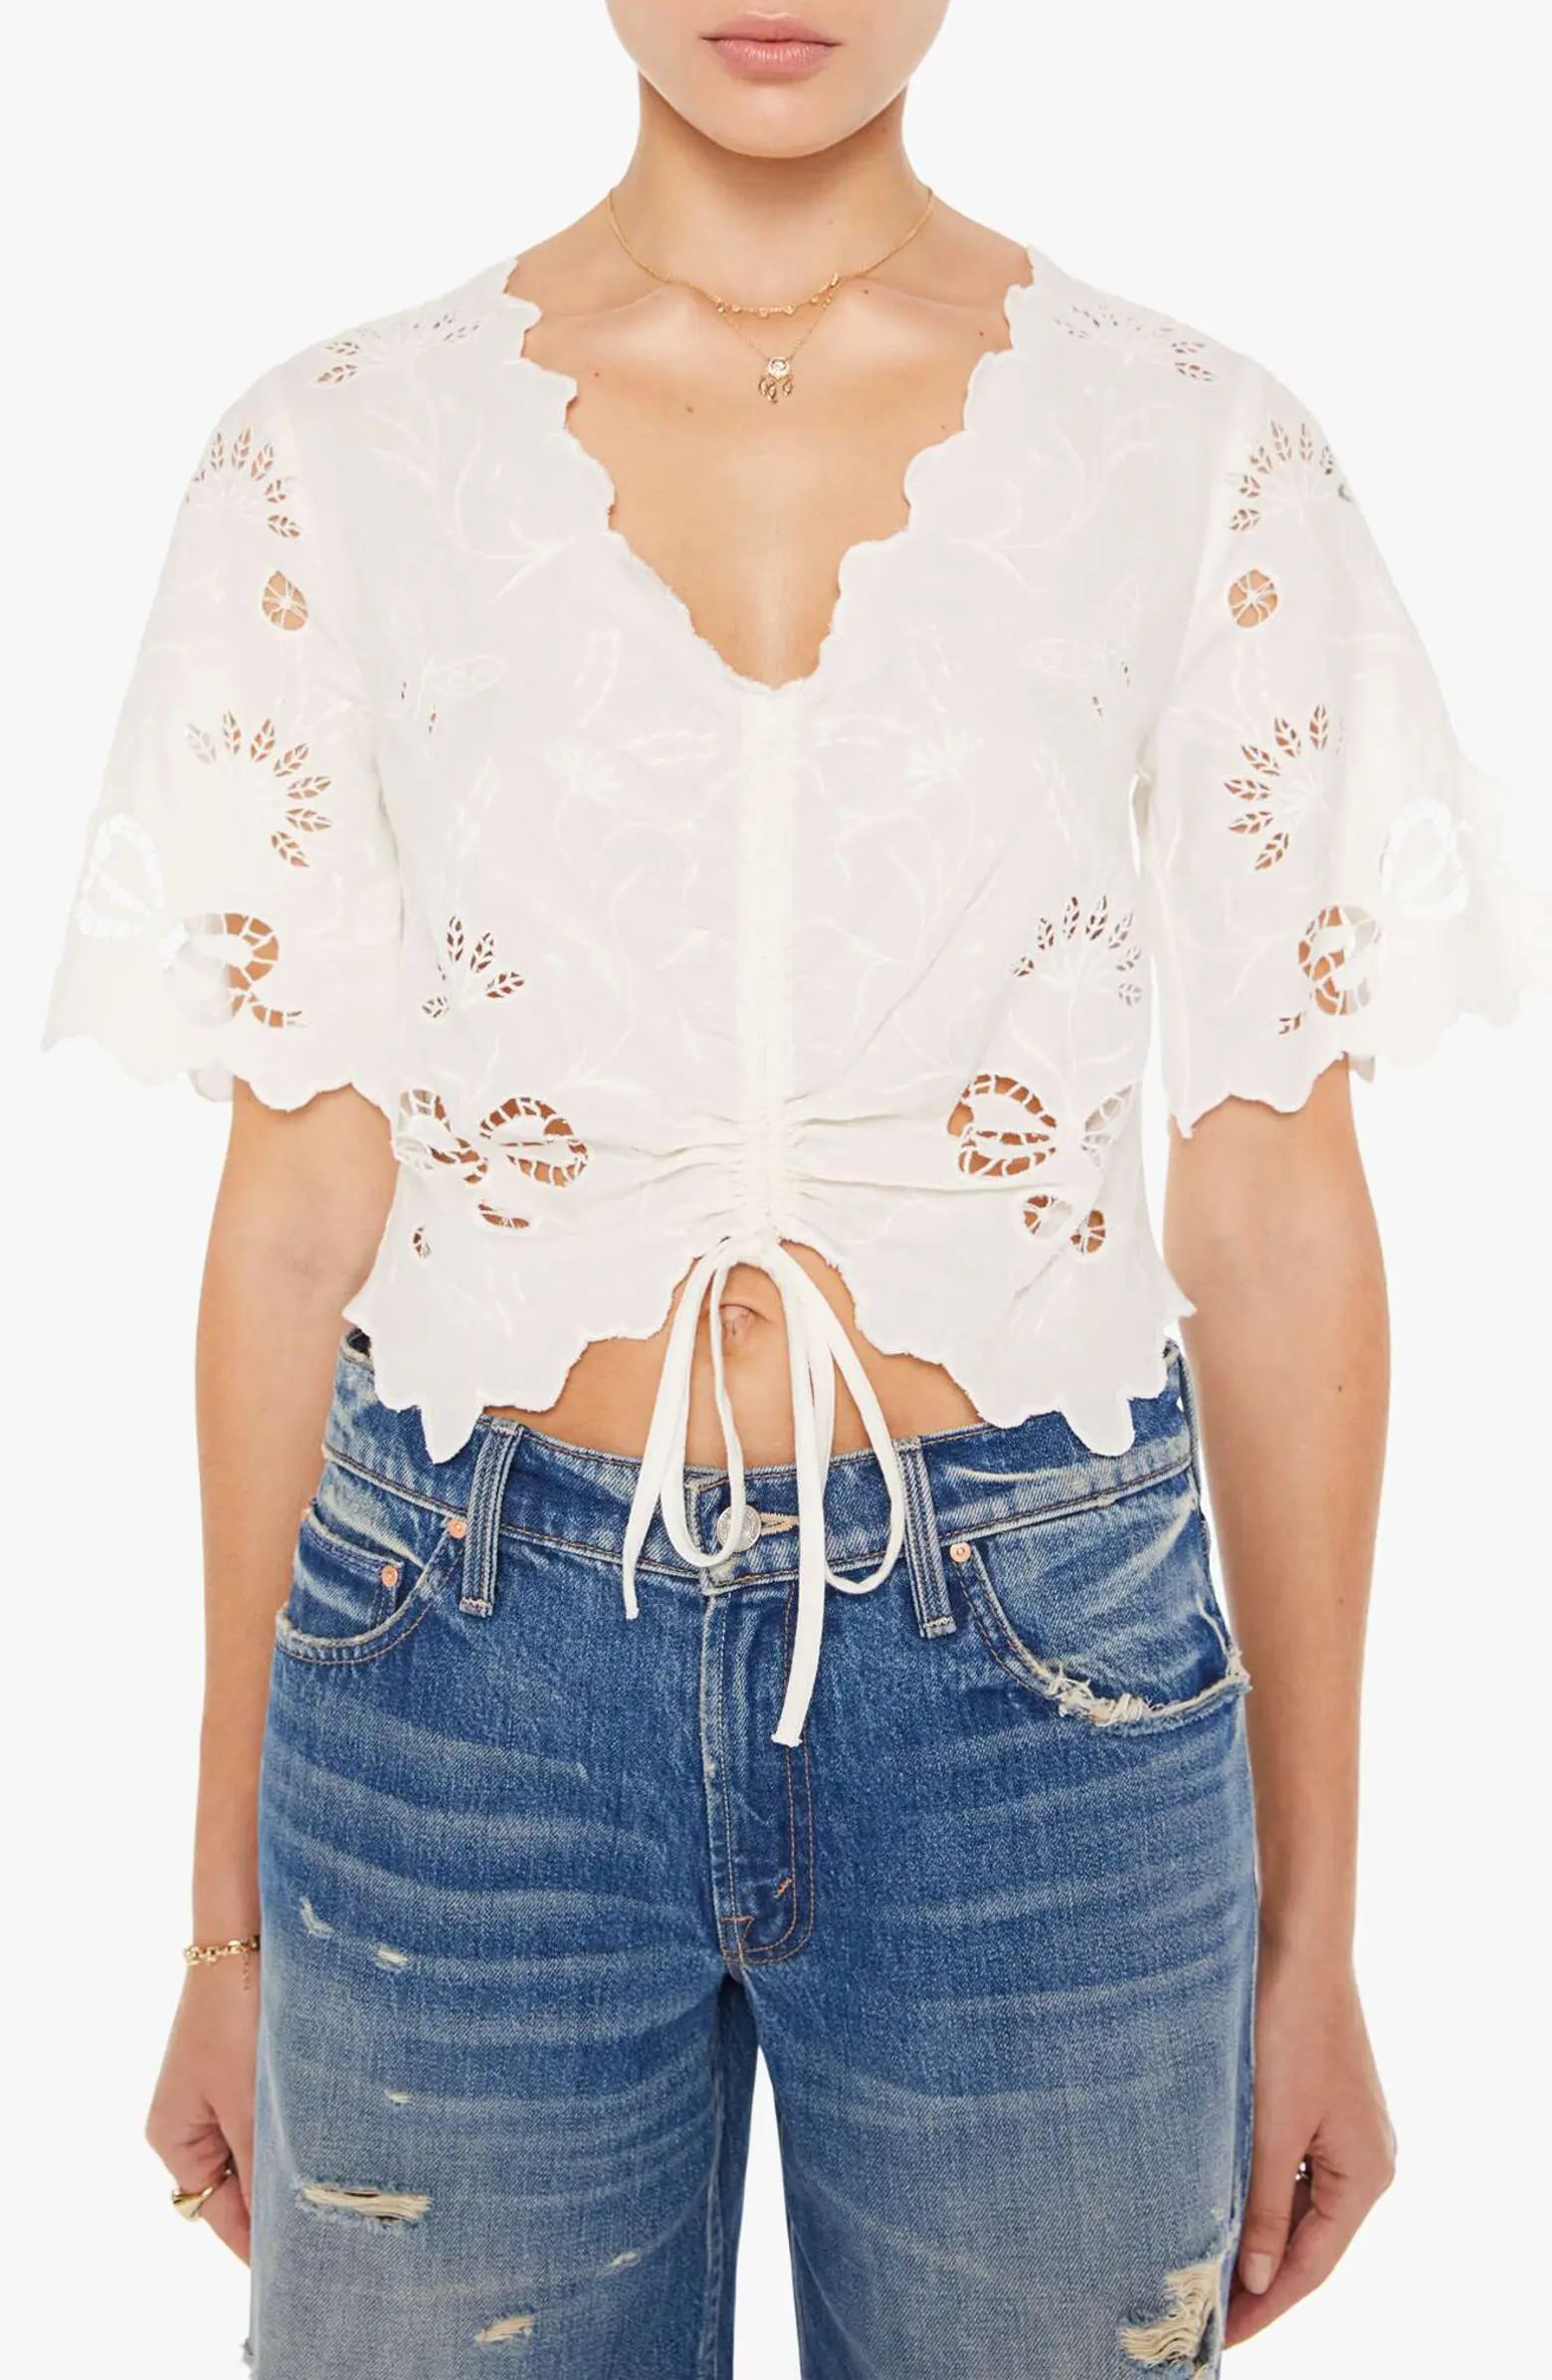 The Social Butterfly Lace Crop Top | Nordstrom